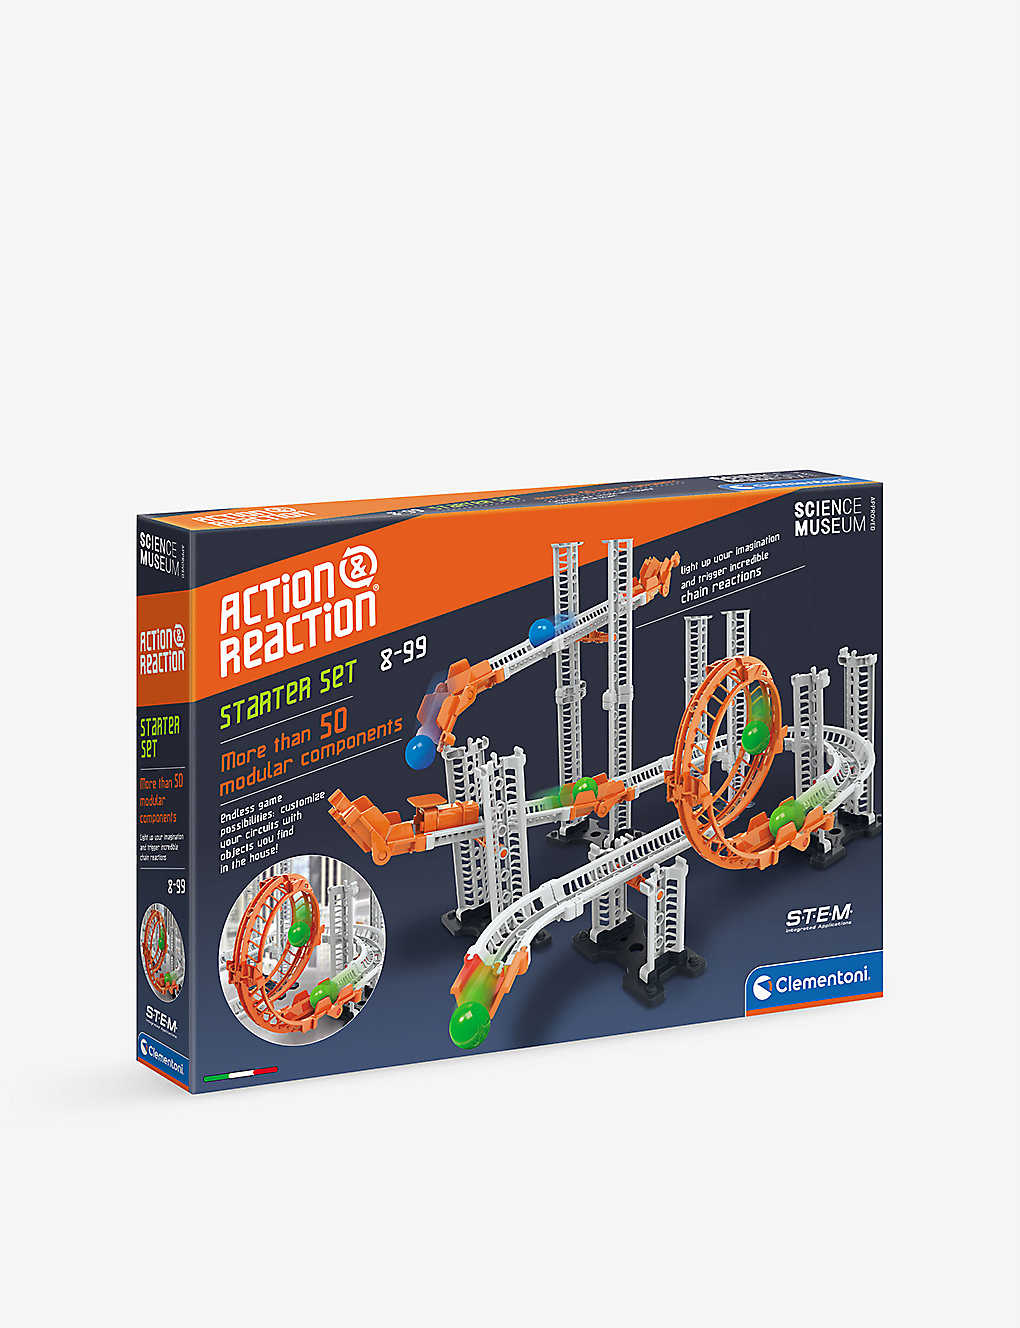 New Clementoni SCIENCE MUSEUM Action and Chain Reaction STARTER SET STEM Kit 